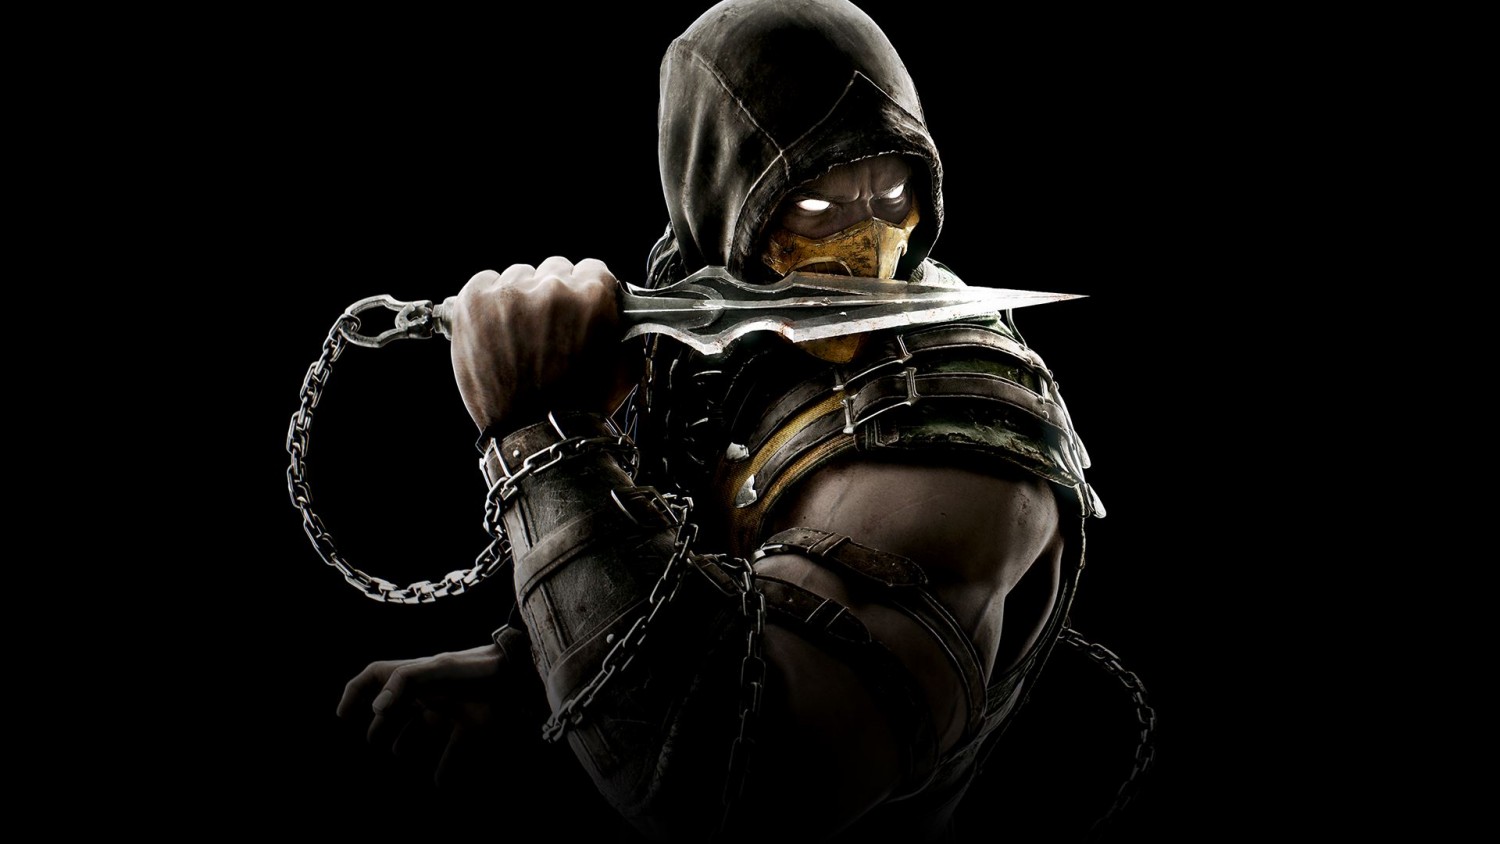 Pack 2 of ‘mortal kombat x’ characters coming this year